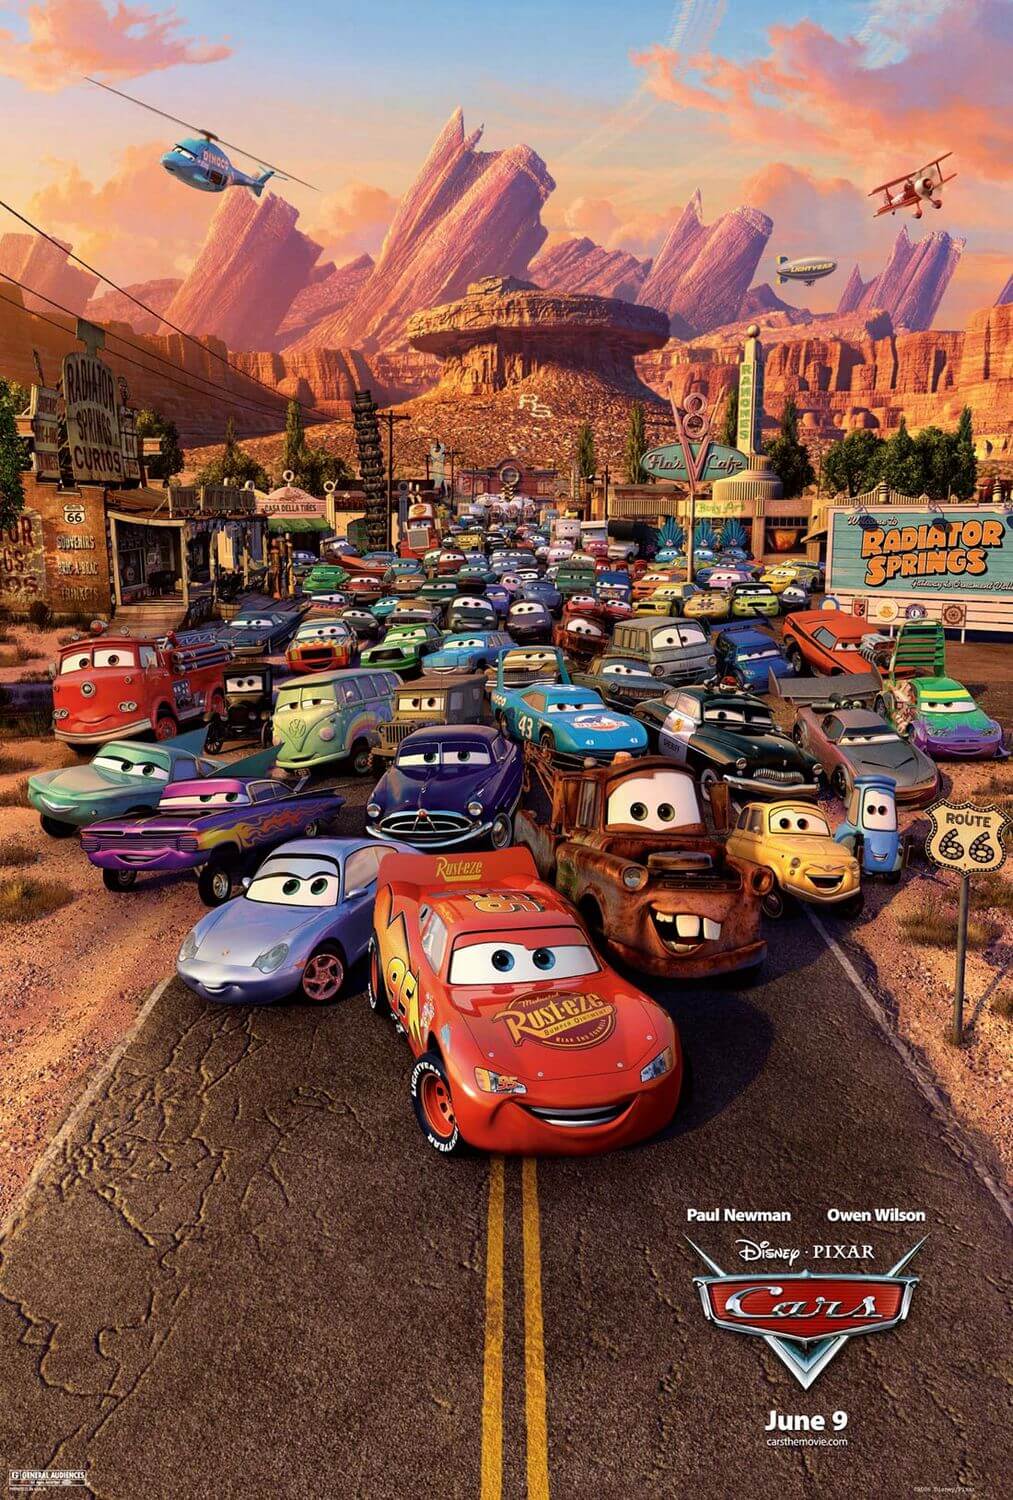 The Monument Valley movie poster of Disney and Pixar's Cars.